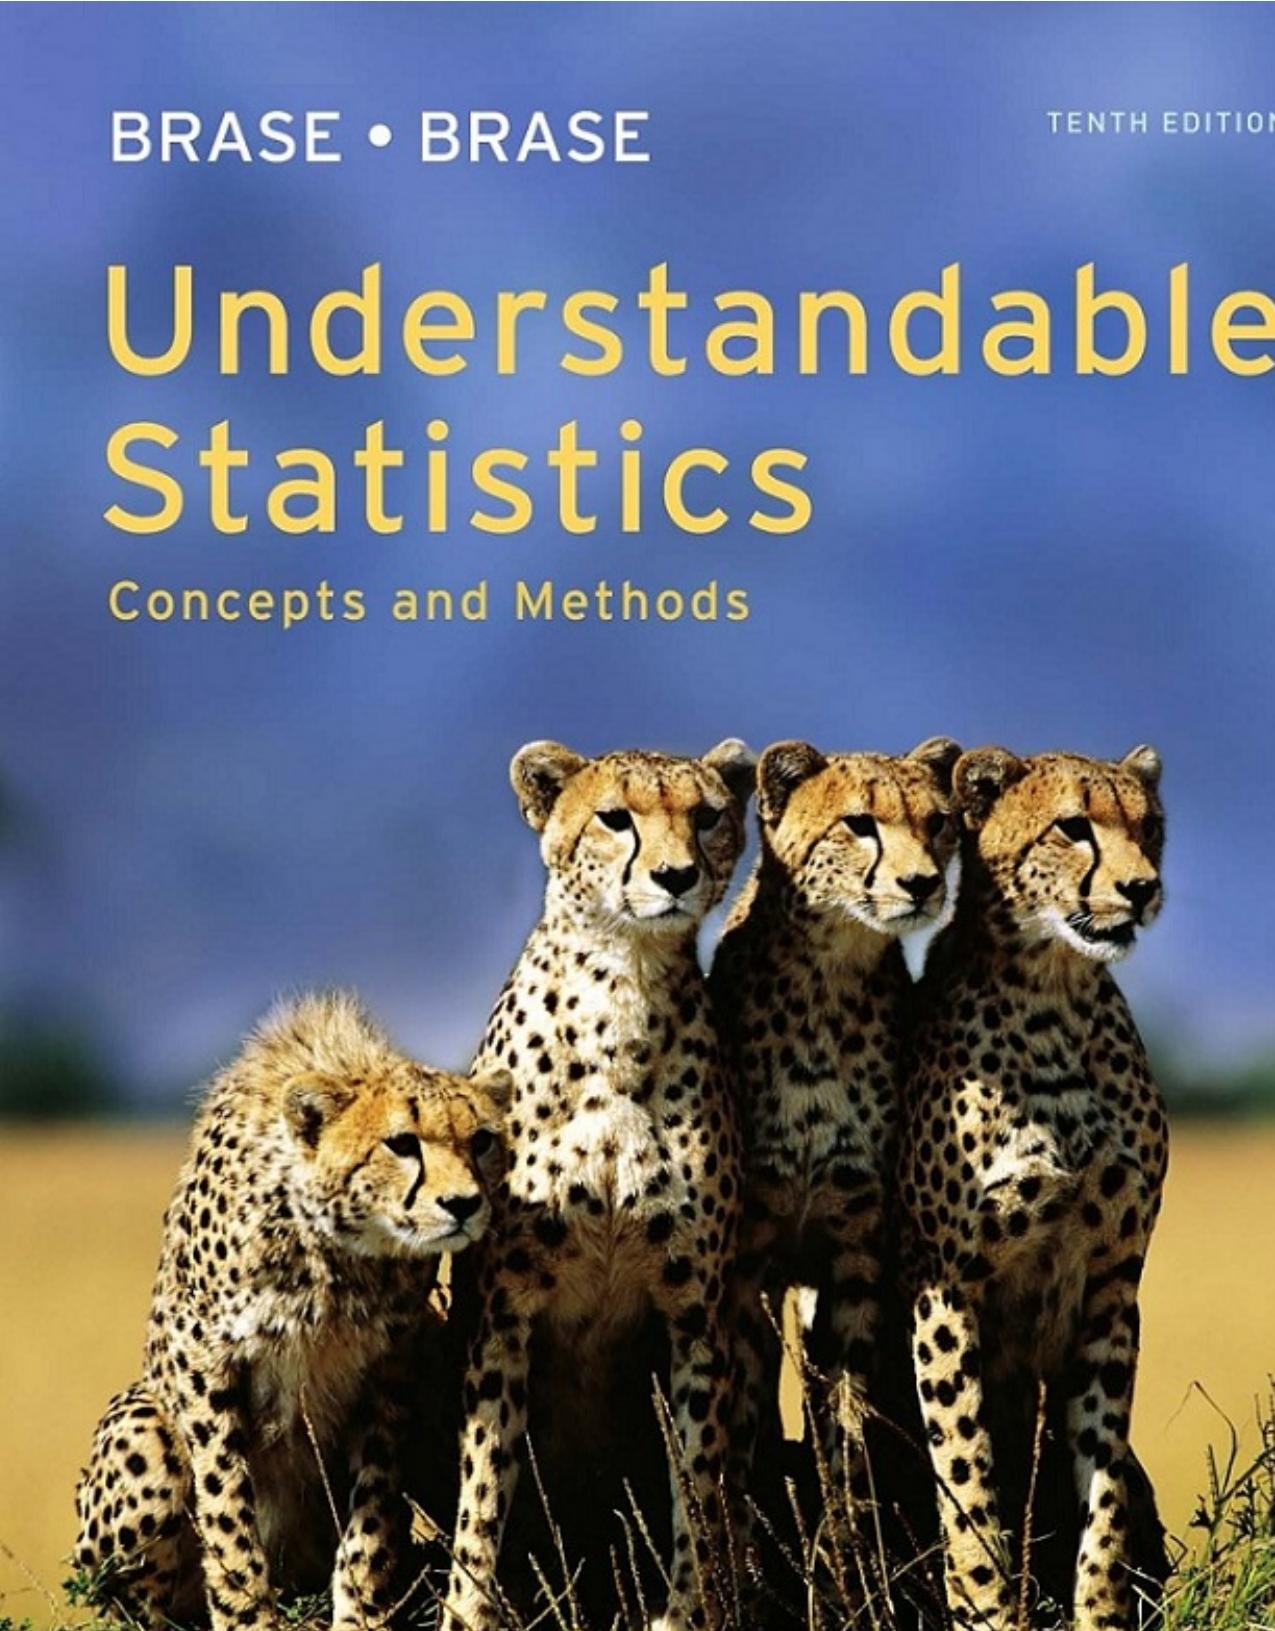 Understandable Statistics: Concepts and Methods, 10th ed.